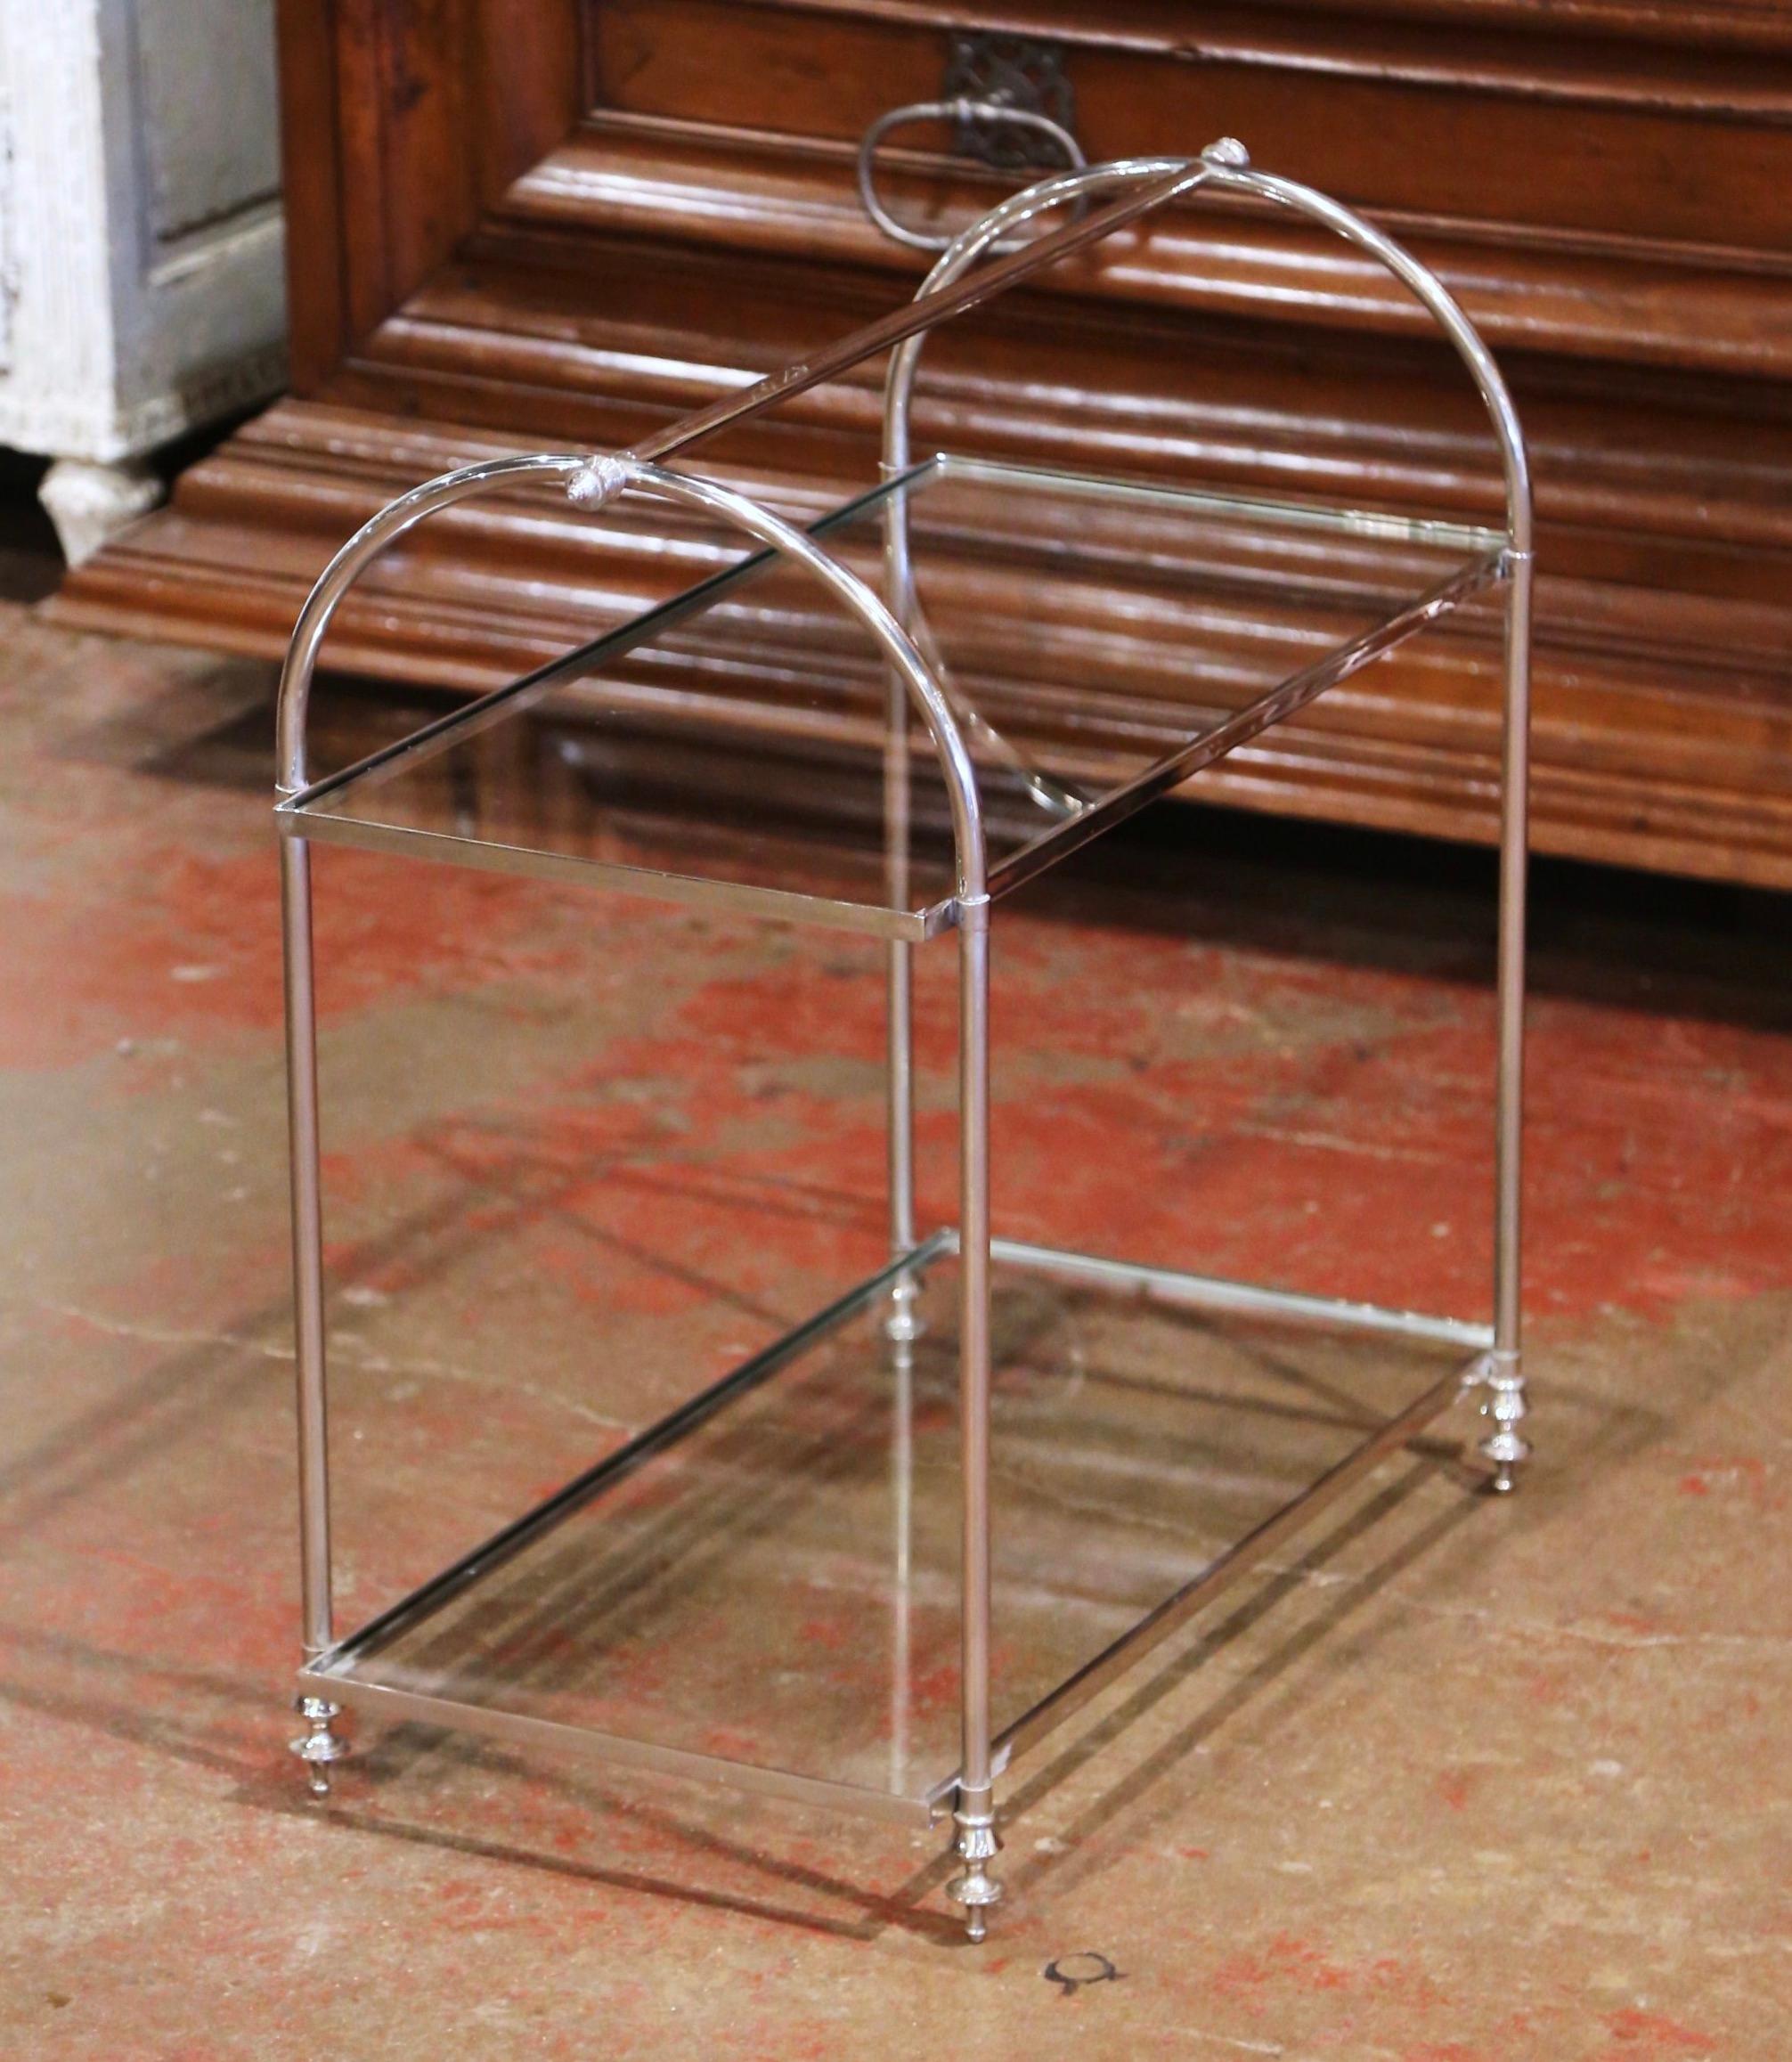 Crafted in France circa 1930, the art deco serving table stands on straight legs ending with toupie feet; ithe table features a large handle over two arched supports across the top. The antique display bar cart is dressed with two colorless glass